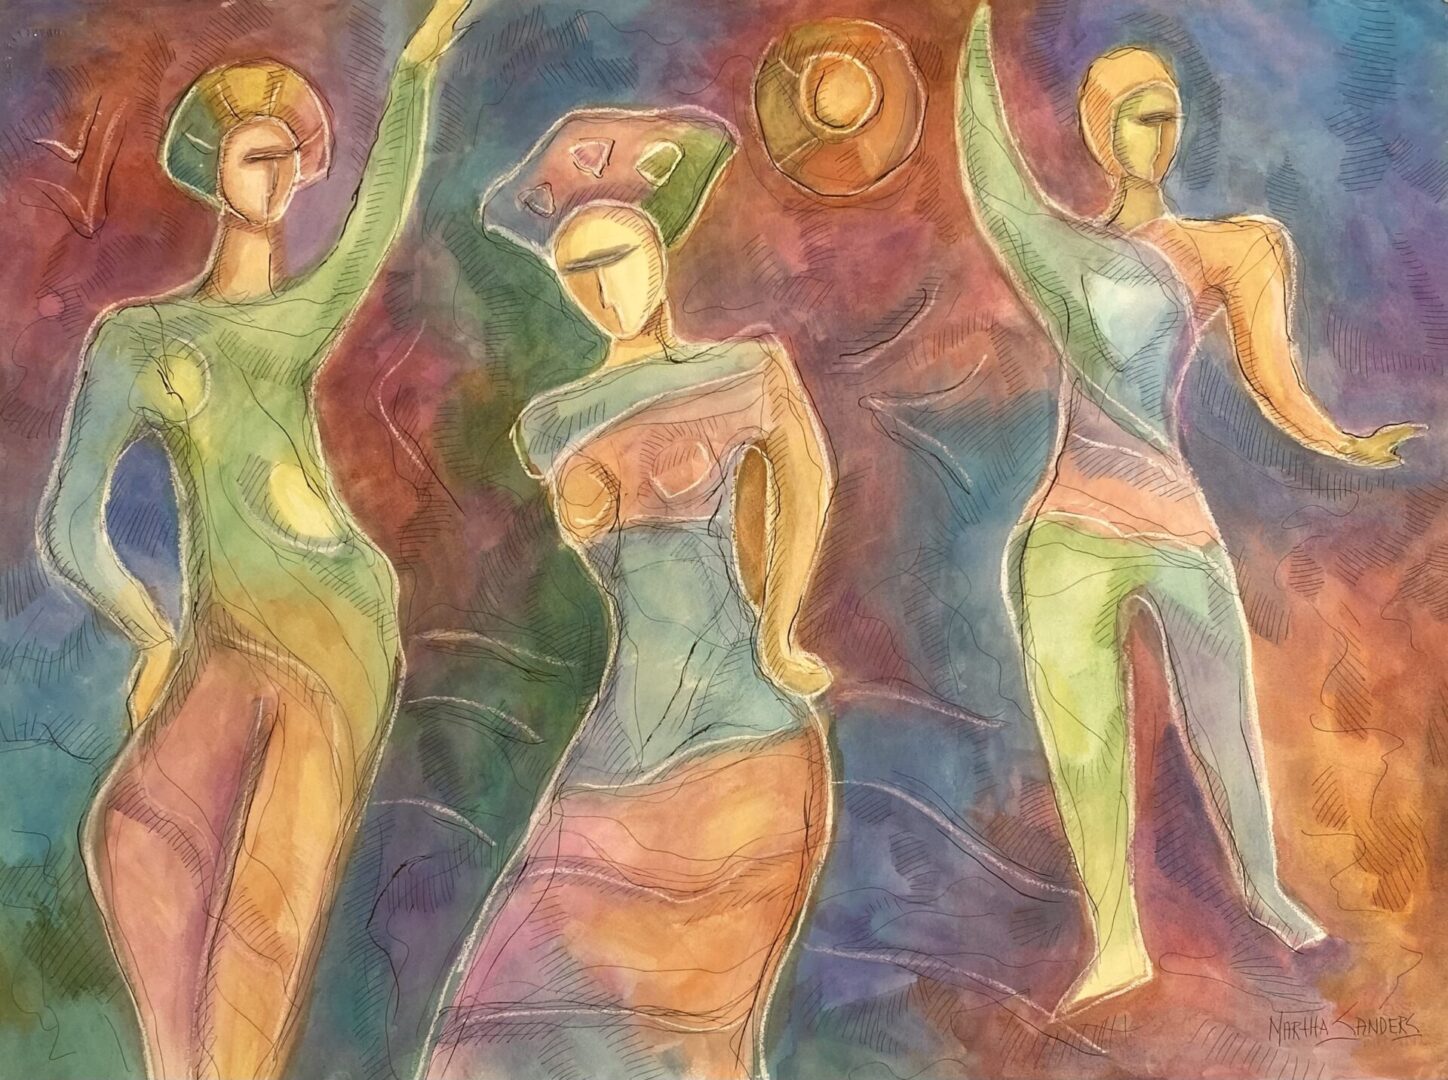 Three women in different colors are dancing.